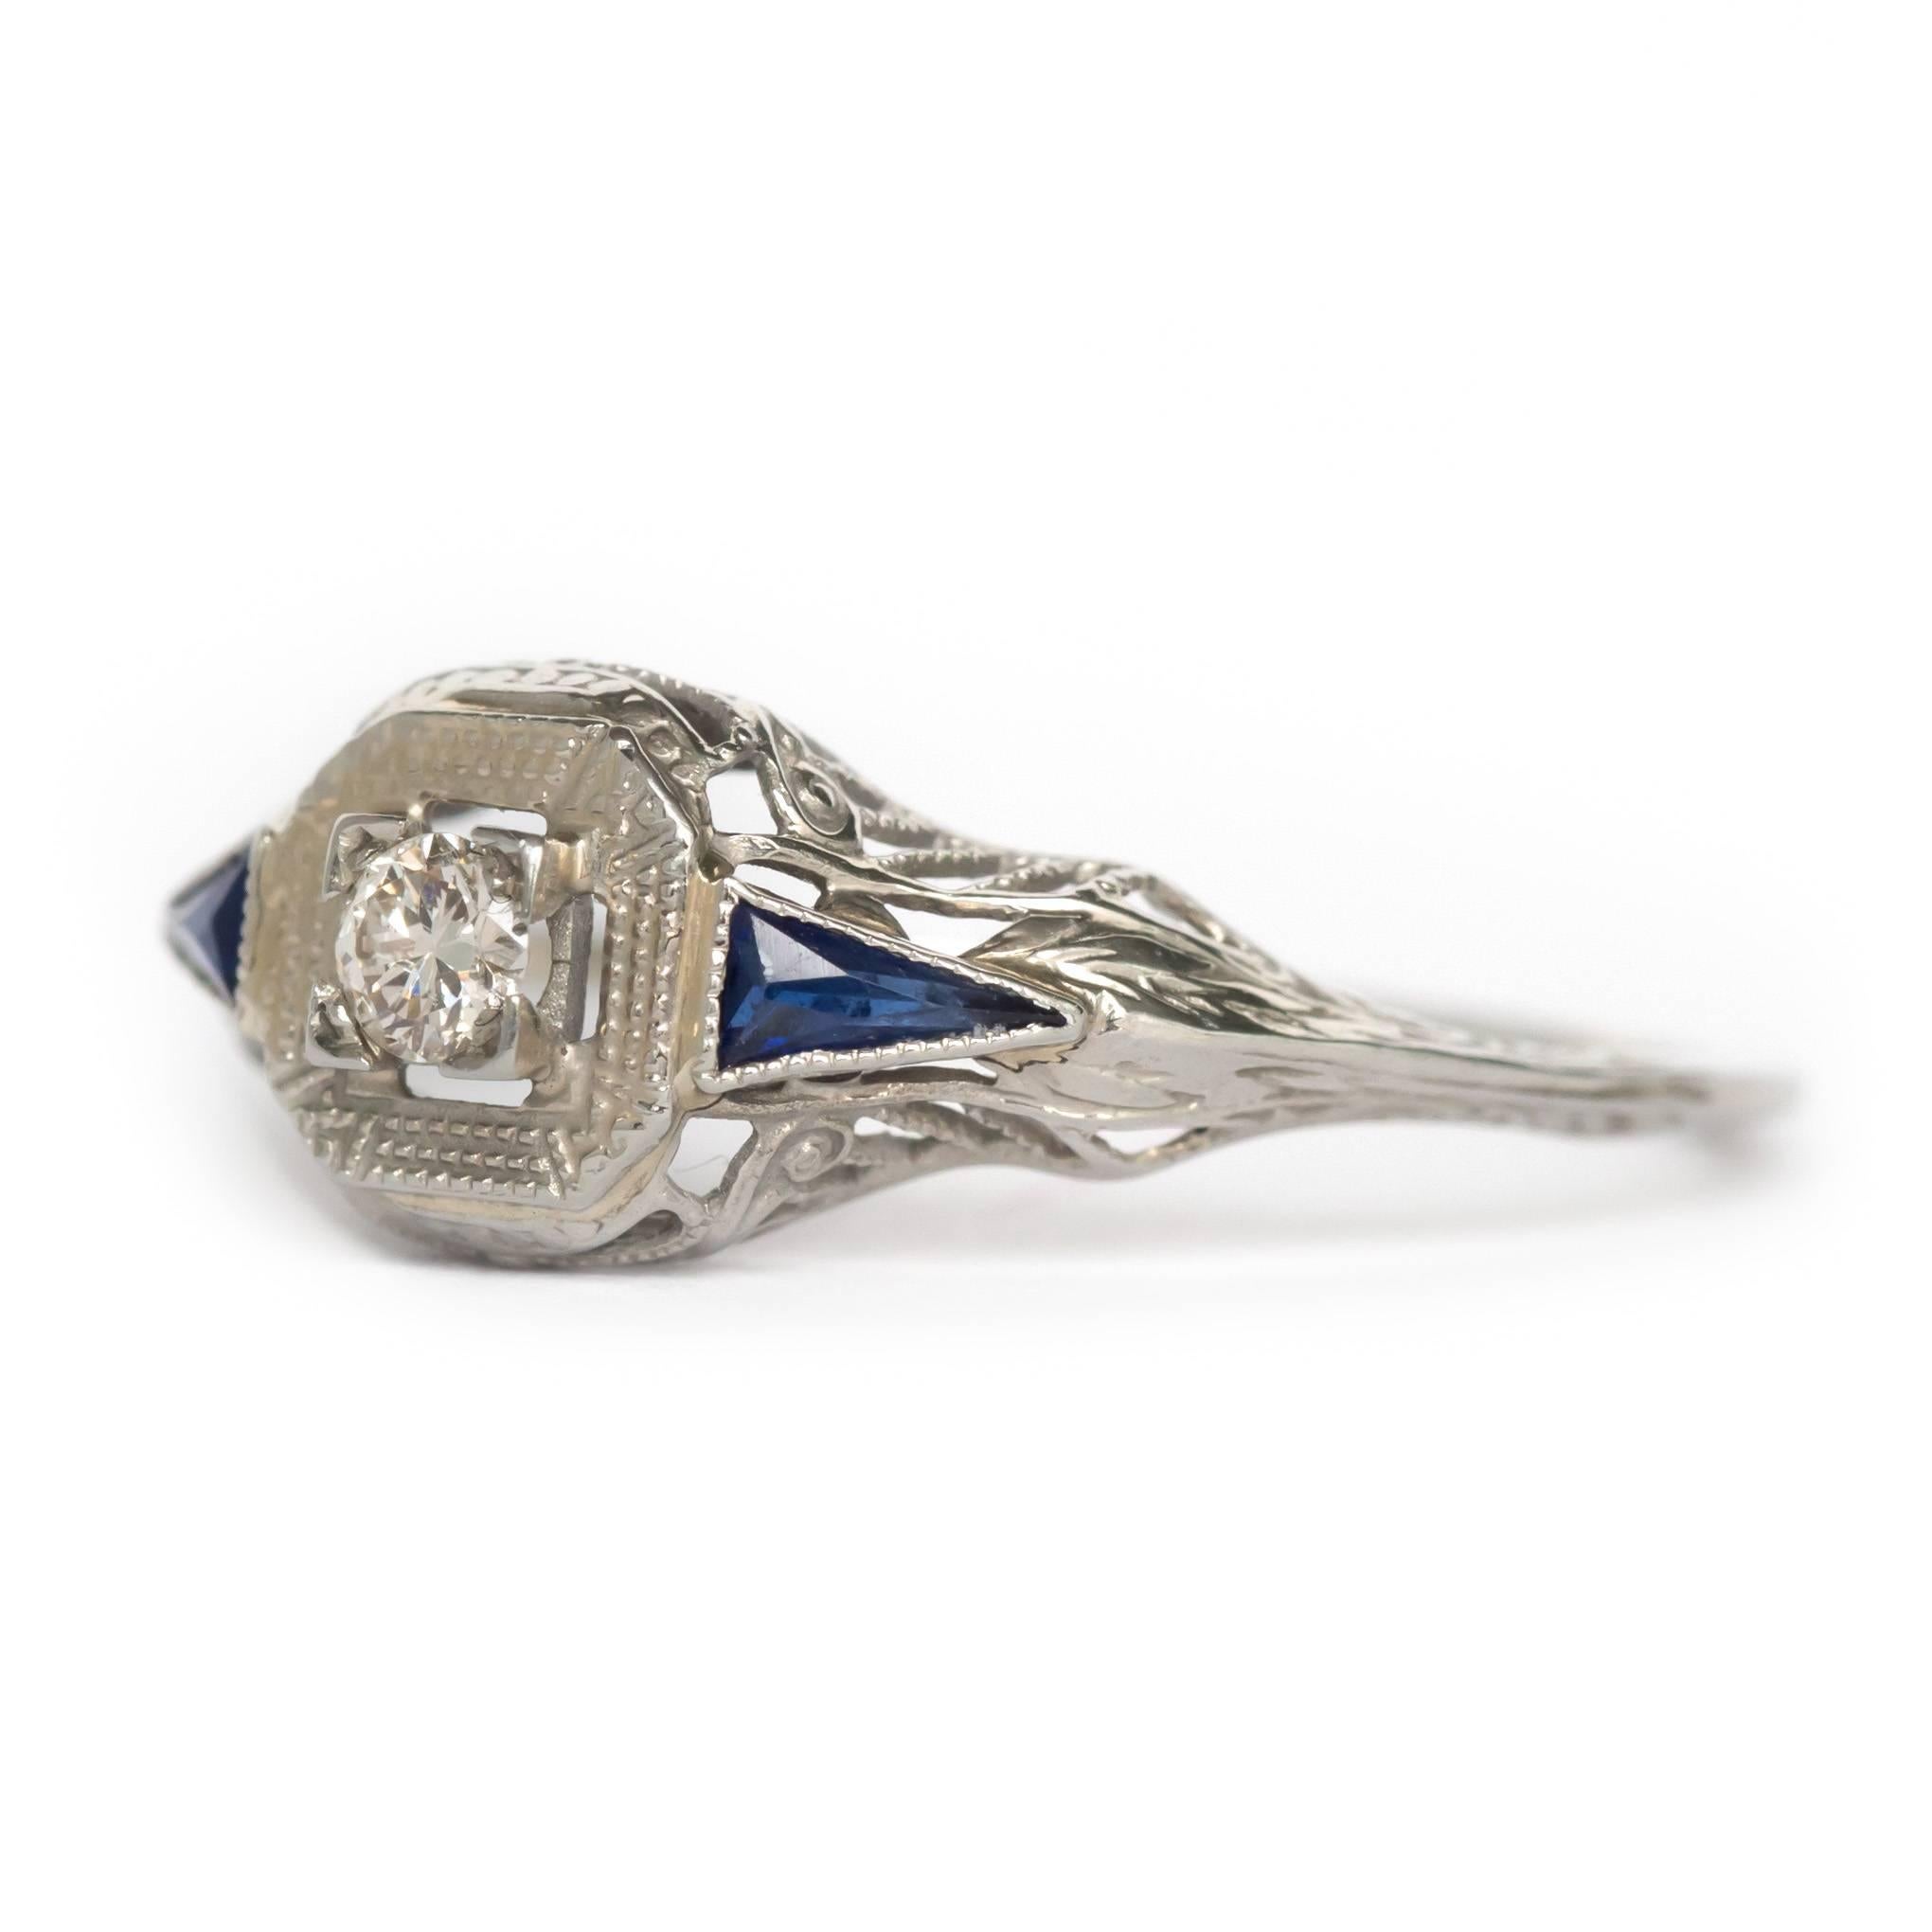 Item Details: 
Ring Size: Approximately 6.9
Metal Type: 18 Karat White Gold
Weight: 1.3 grams

Center Diamond Details:
Shape: Antique Single Cut
Carat Weight: .05 carat
Color: G
Clarity: SI1

Color Stone Details: 
Type: Synthetic Sapphire
Shape: